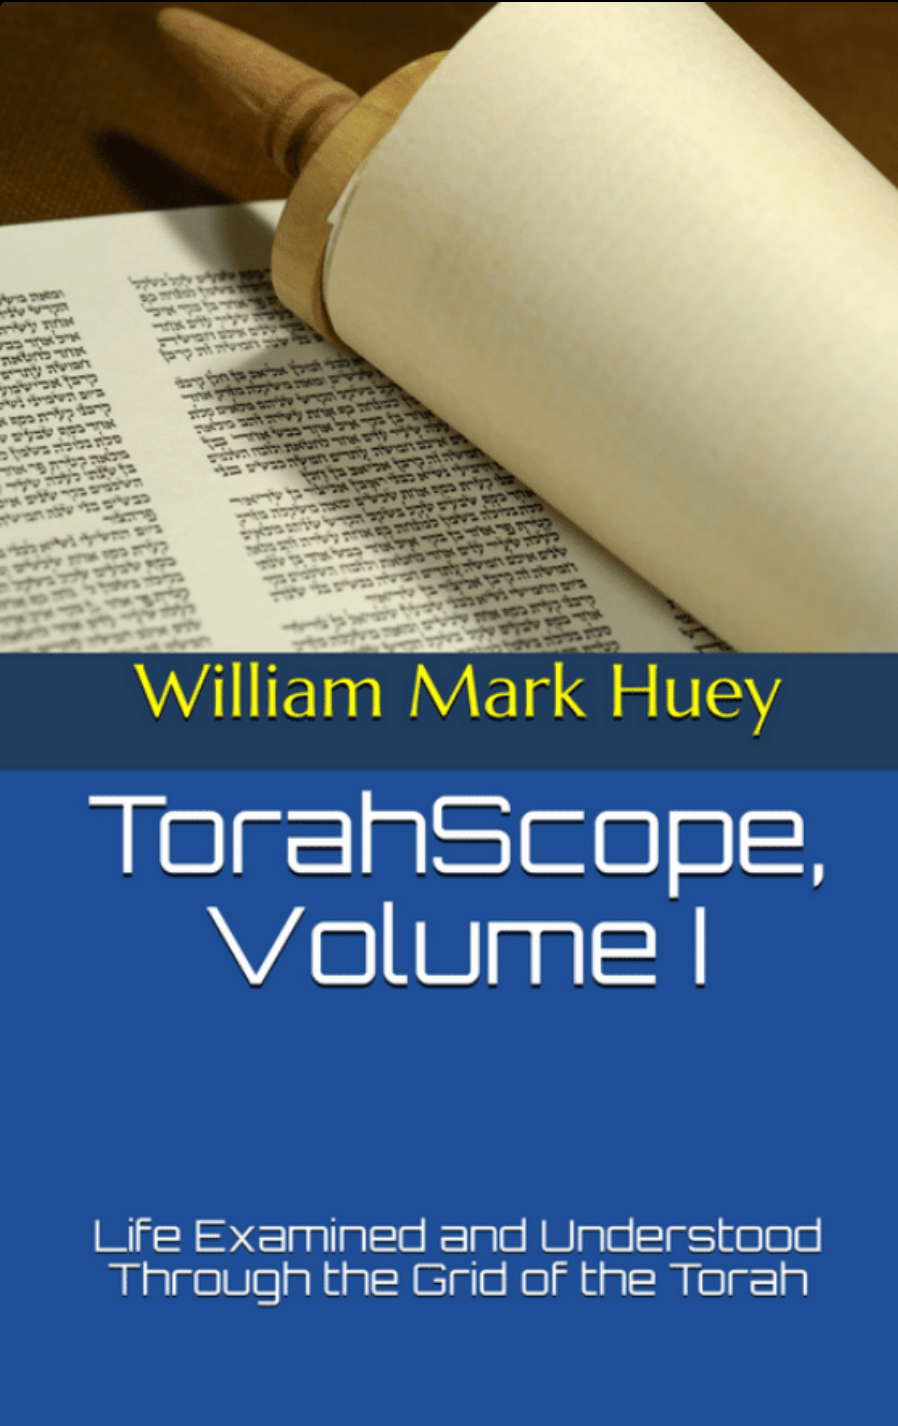 Torah Scope Volume 1: Life Examined and Understood through the Grid of Torah by William Mark Huey